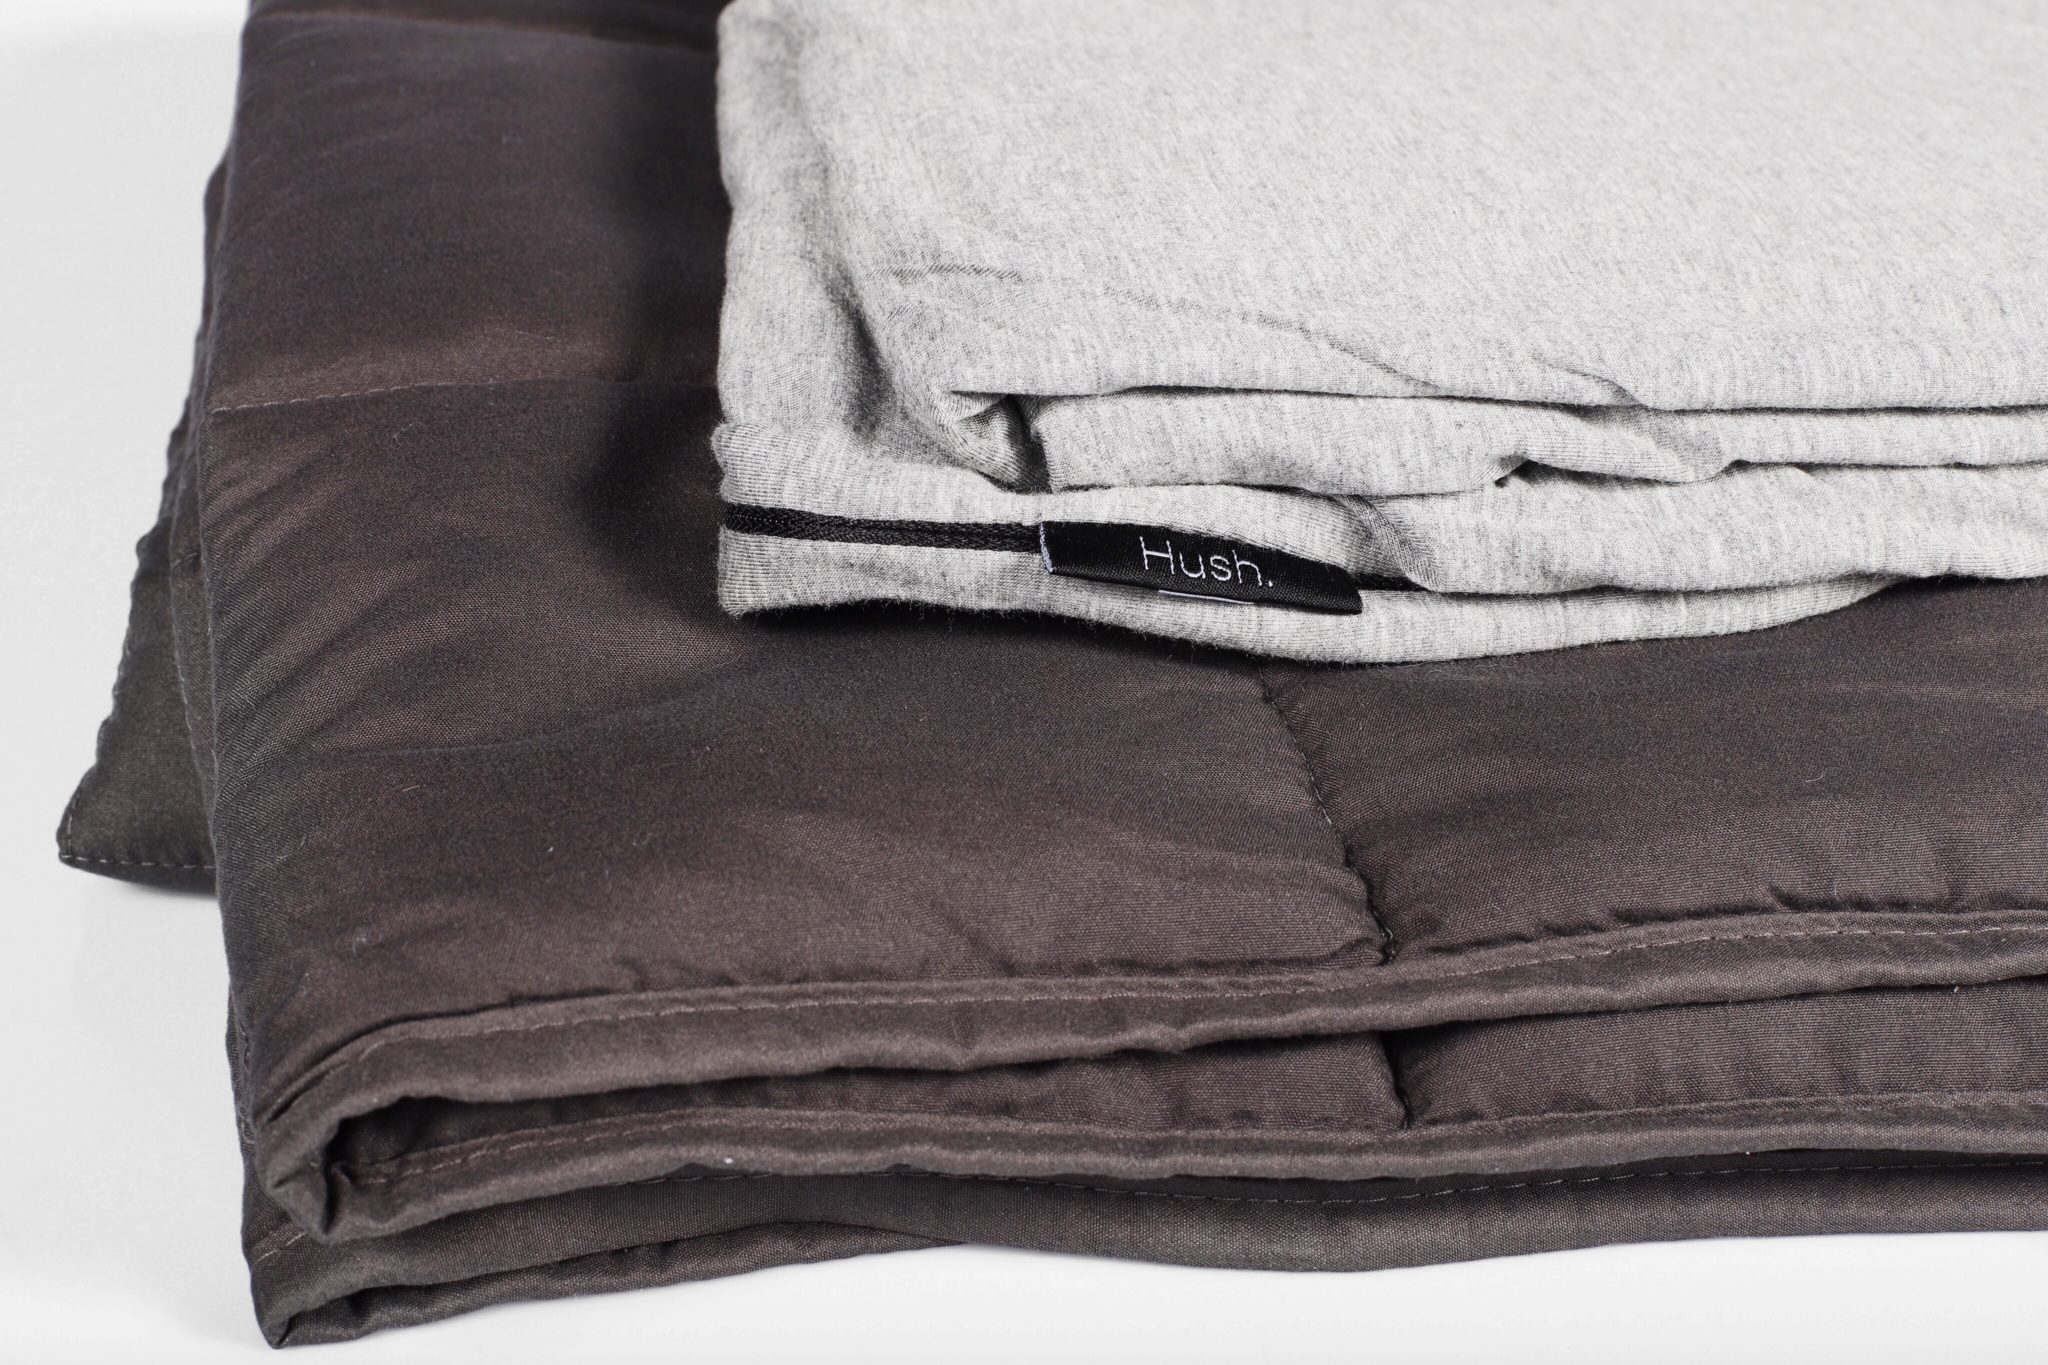 The folded-up Hush Iced Weighted Blanket.